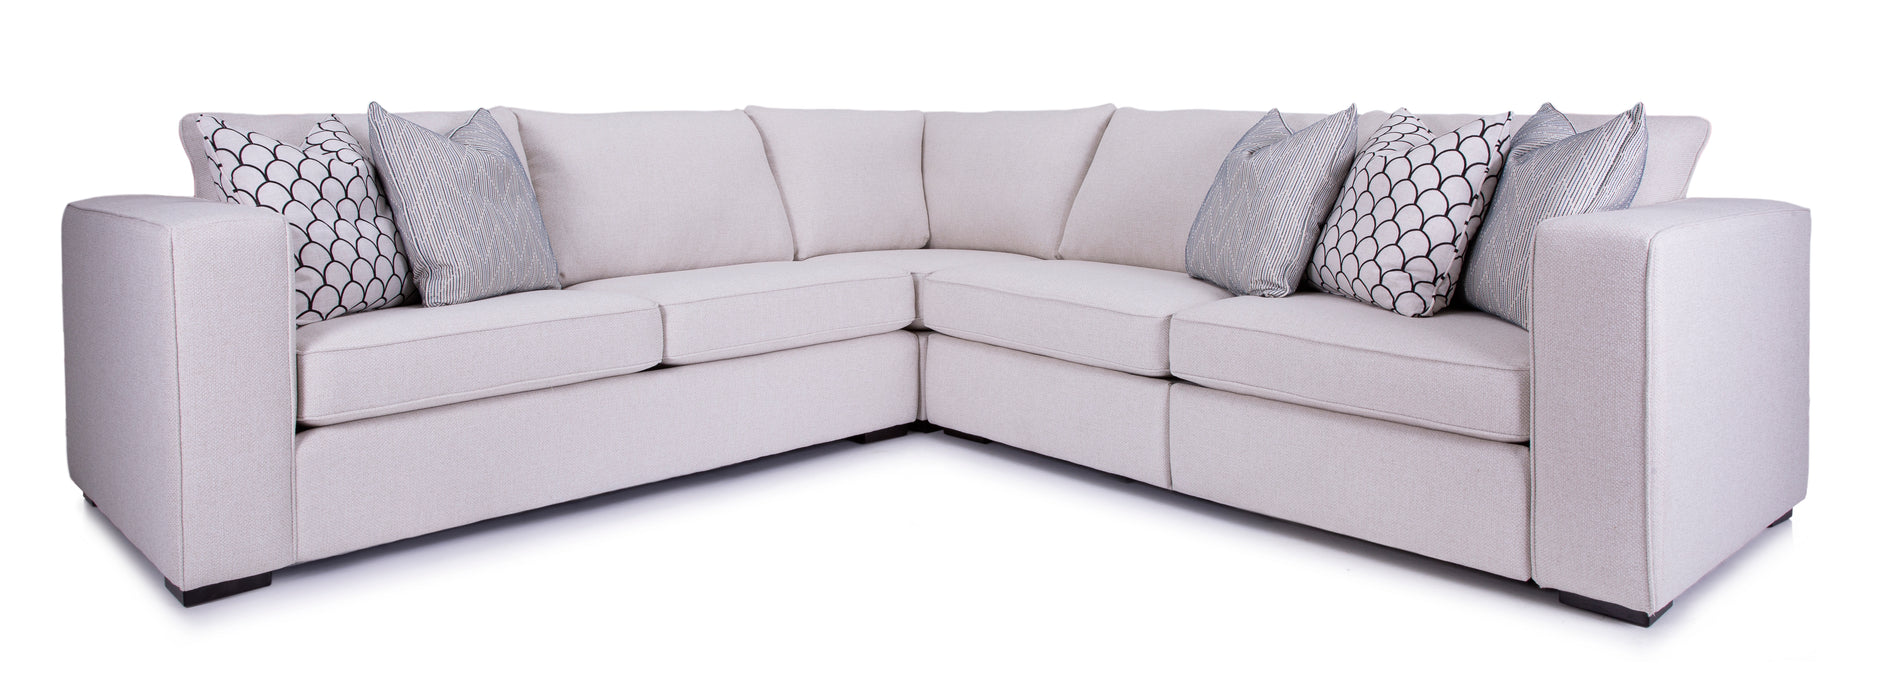 2900 Sectional (Colour Not As Shown)